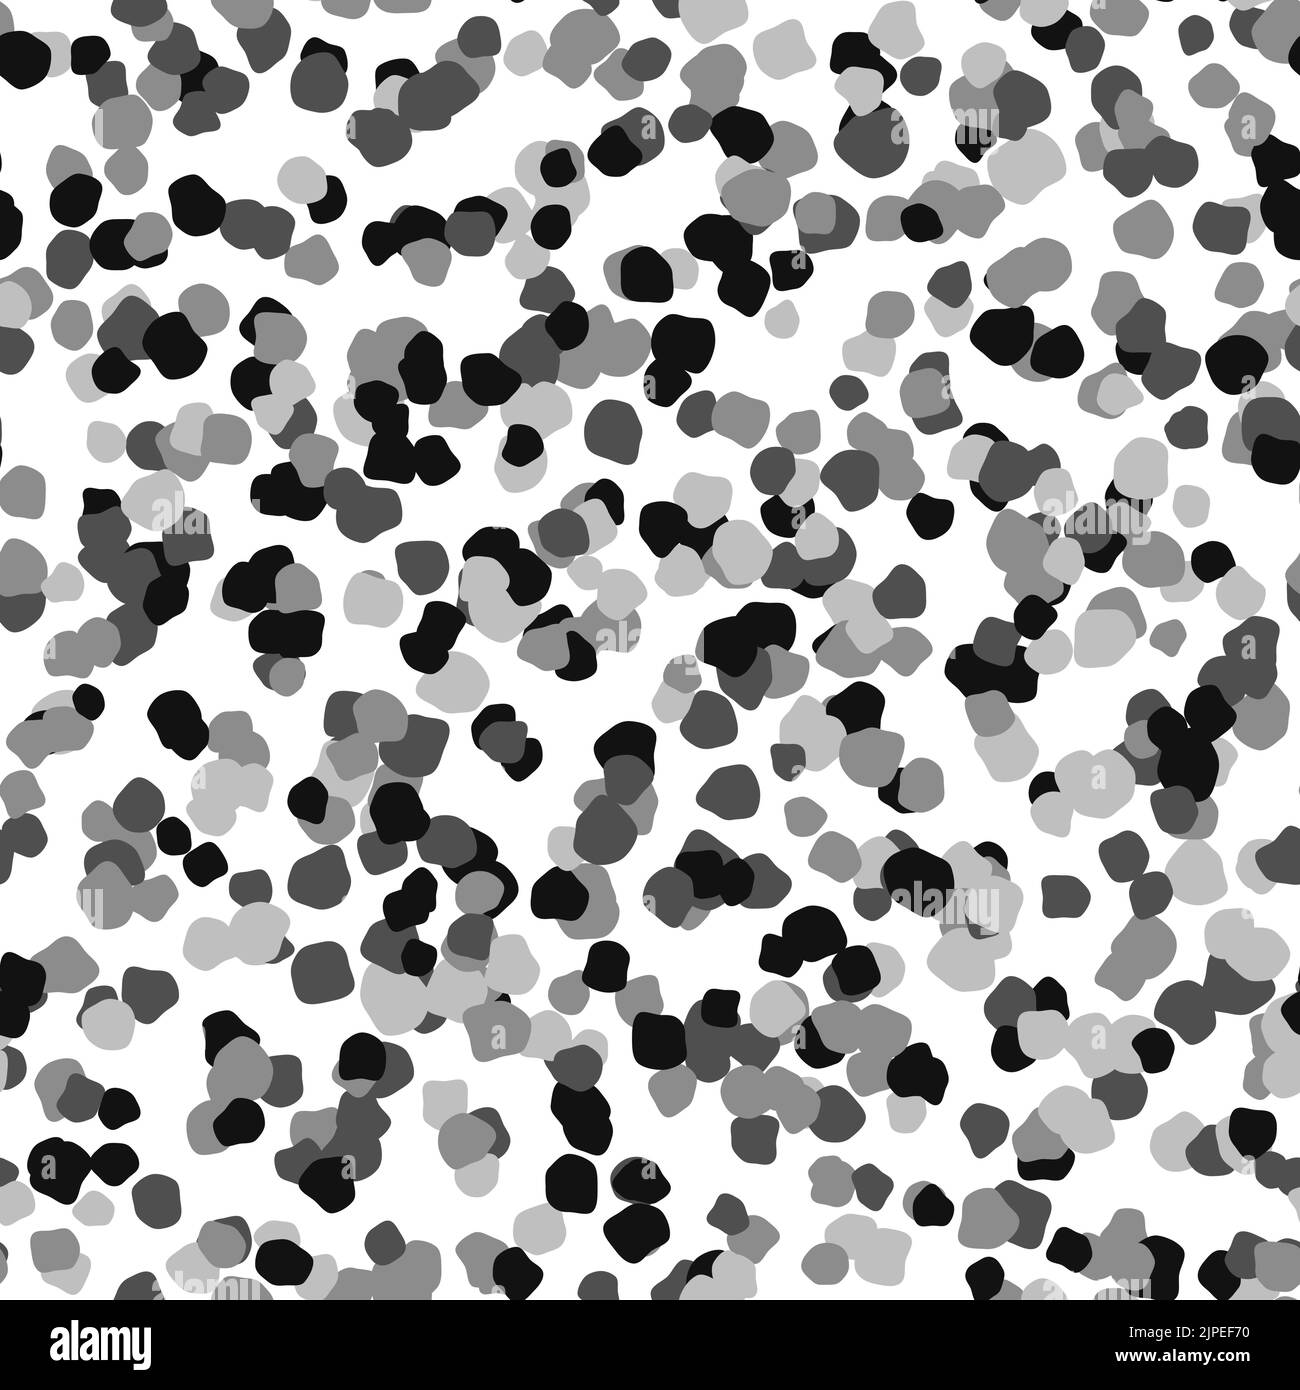 Seamless spray spots texture. Distress grain background. Grunge splash repeated effect. Dirty overlay repeating pattern. Speckles distressed effect Stock Vector